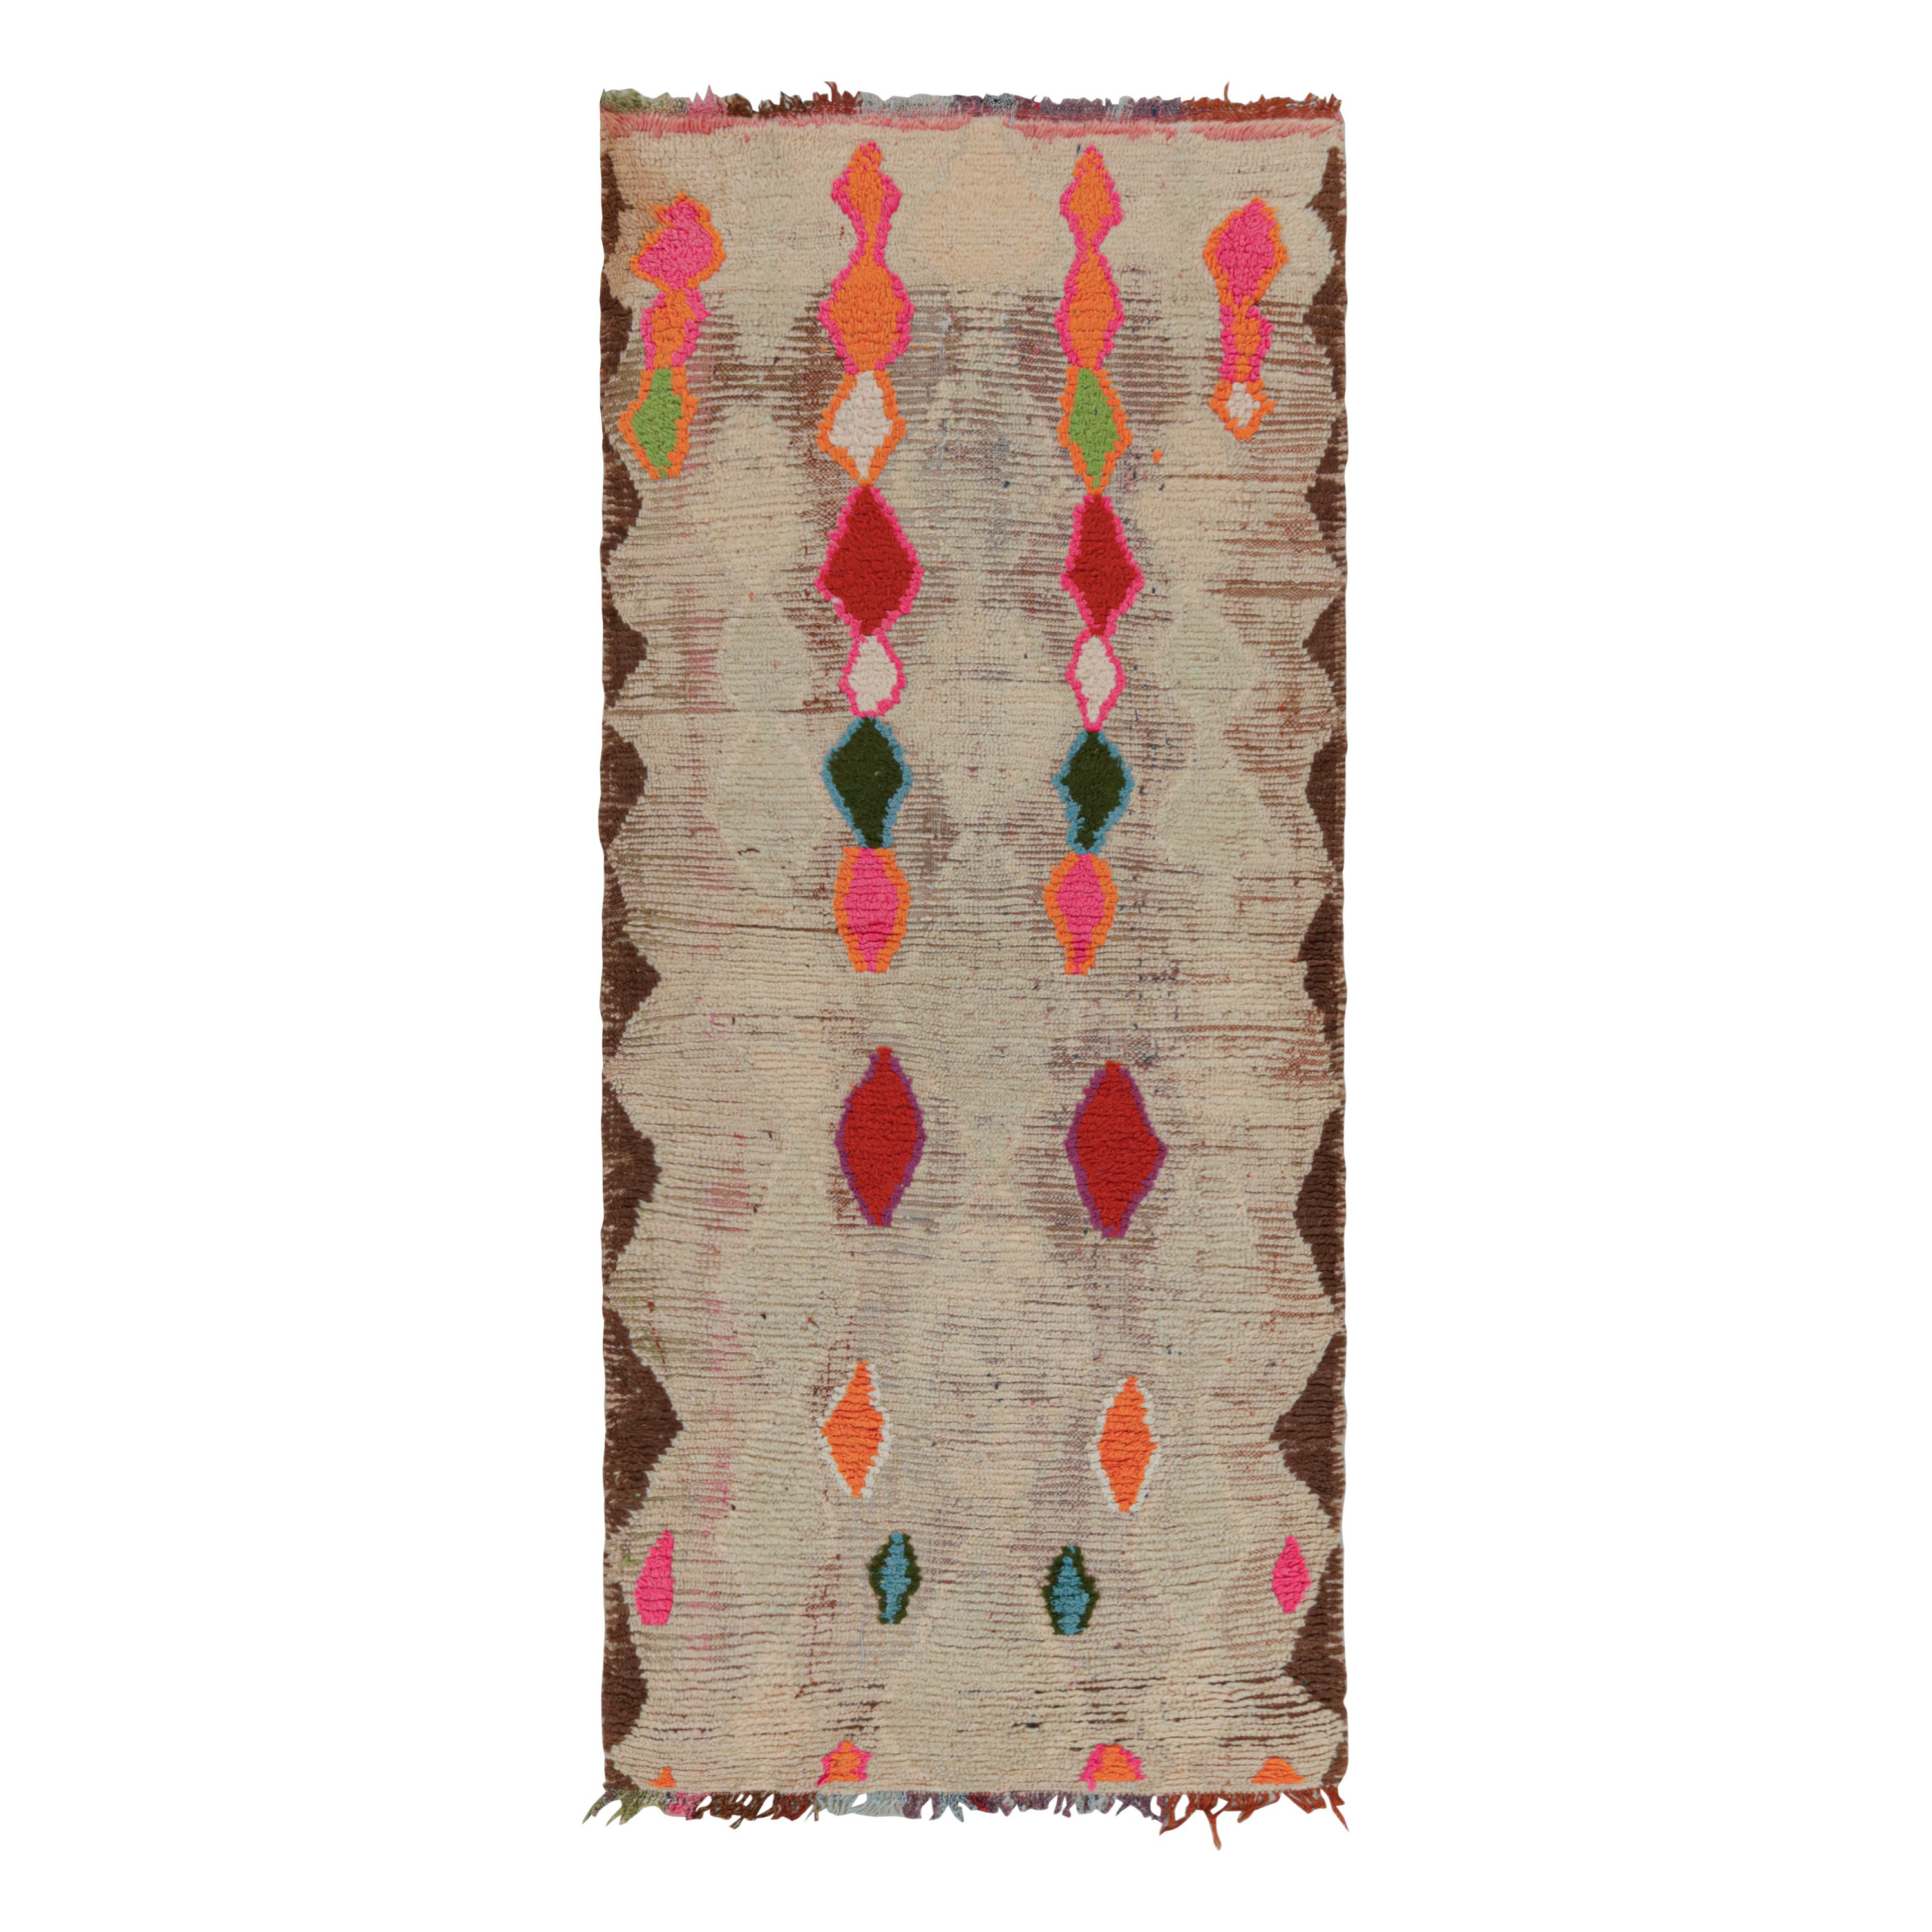 Vintage Moroccan Runner Rug with Diamond Patterns, from Rug & Kilim  For Sale